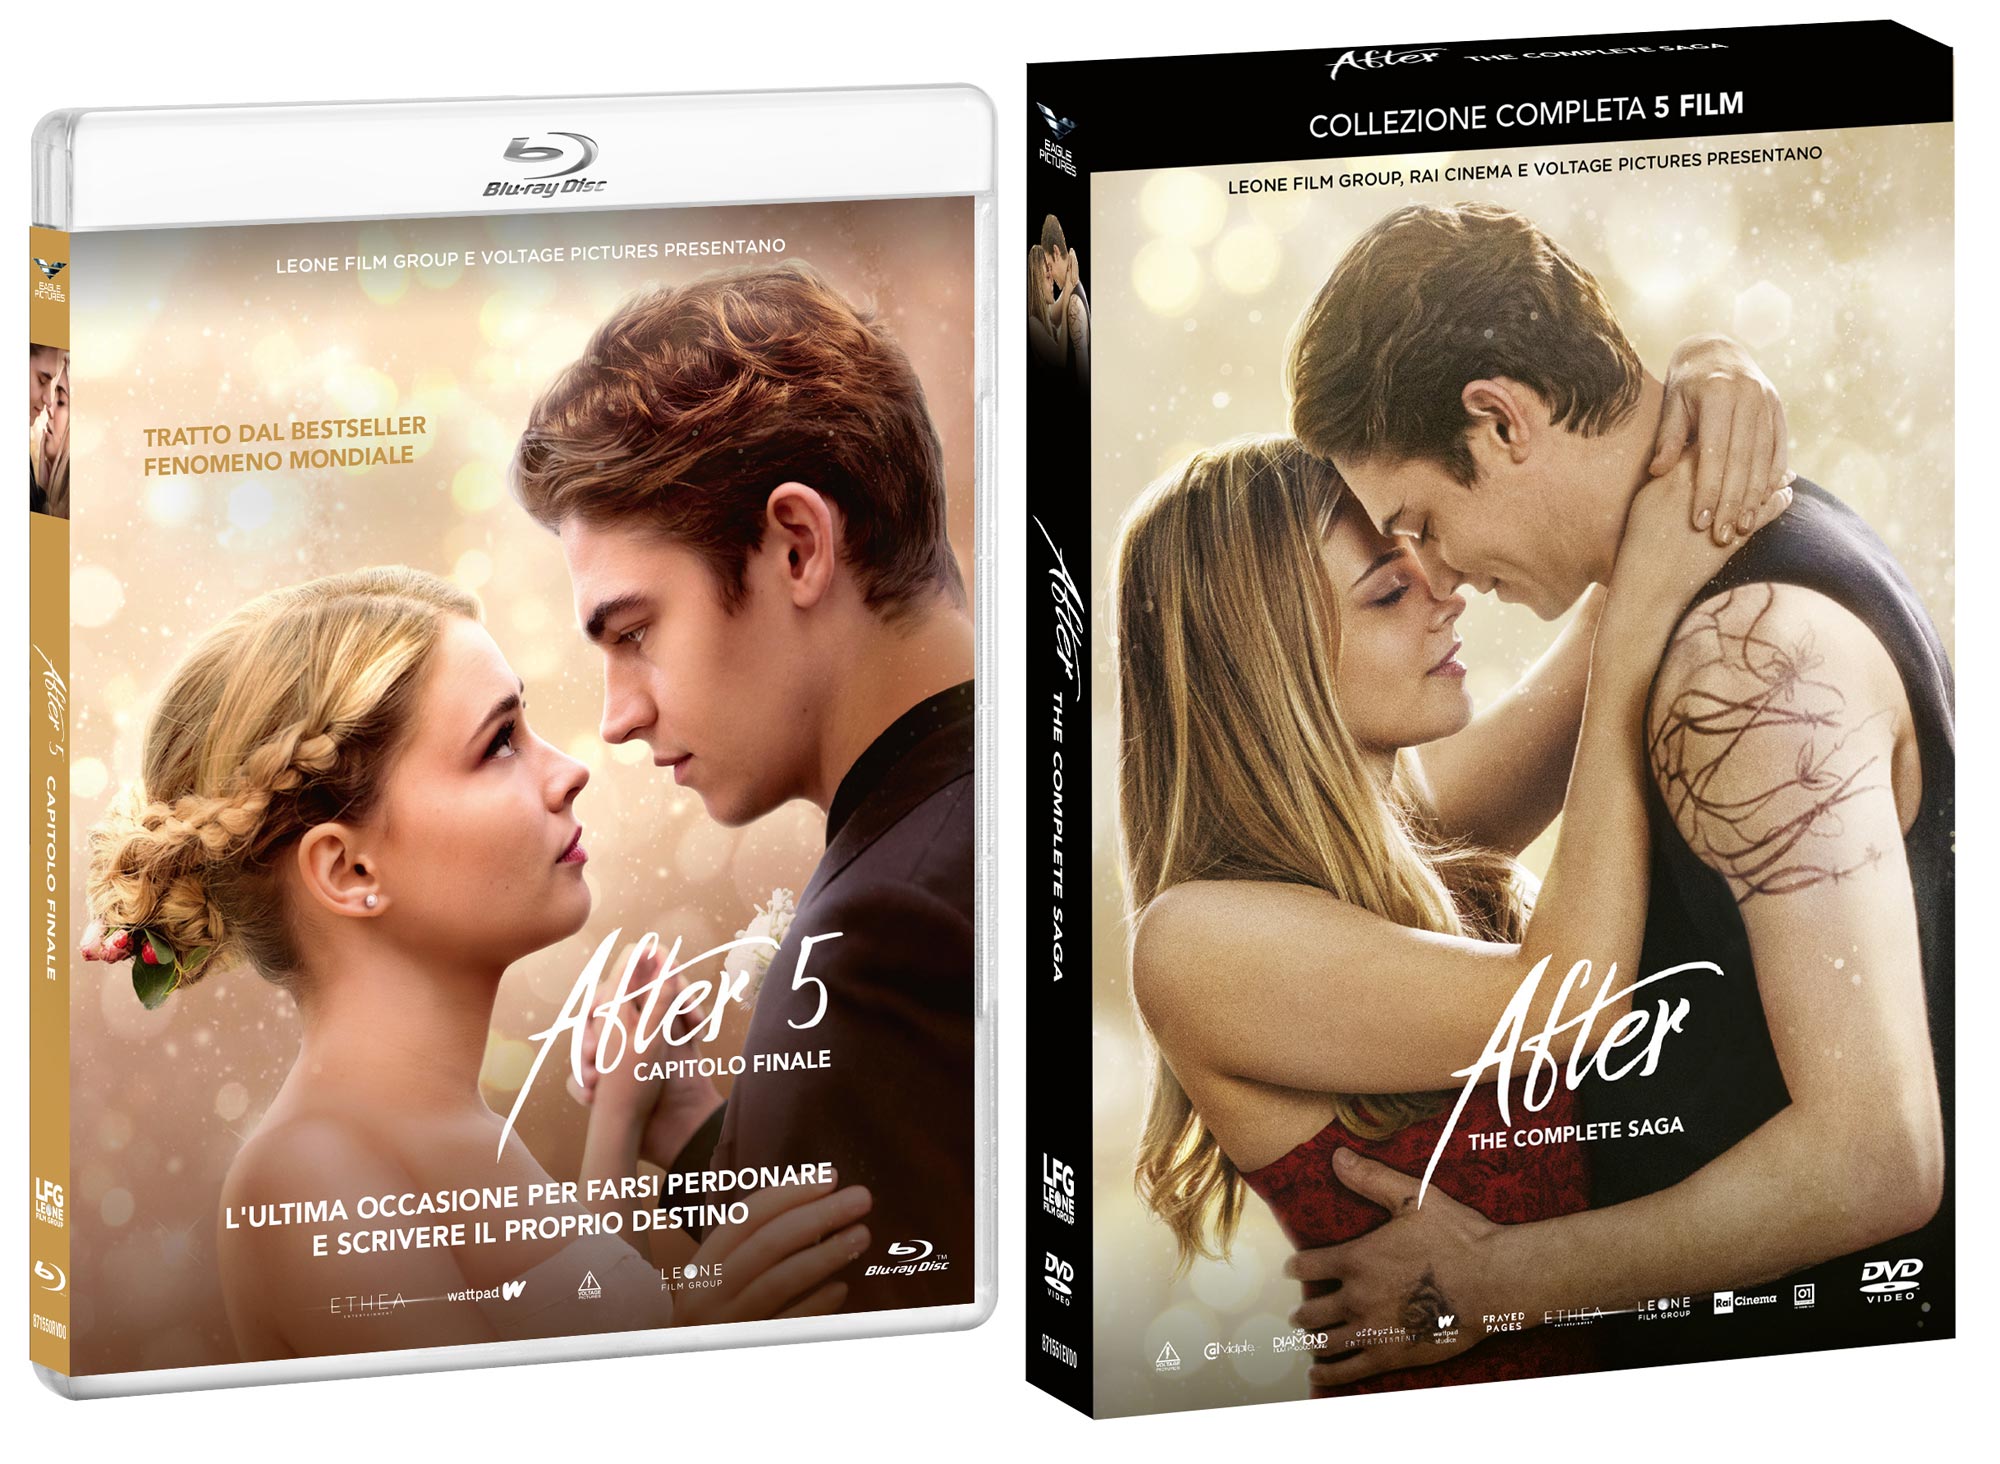 After 5 in Blu-ray e Cofanetto 'After' in DVD